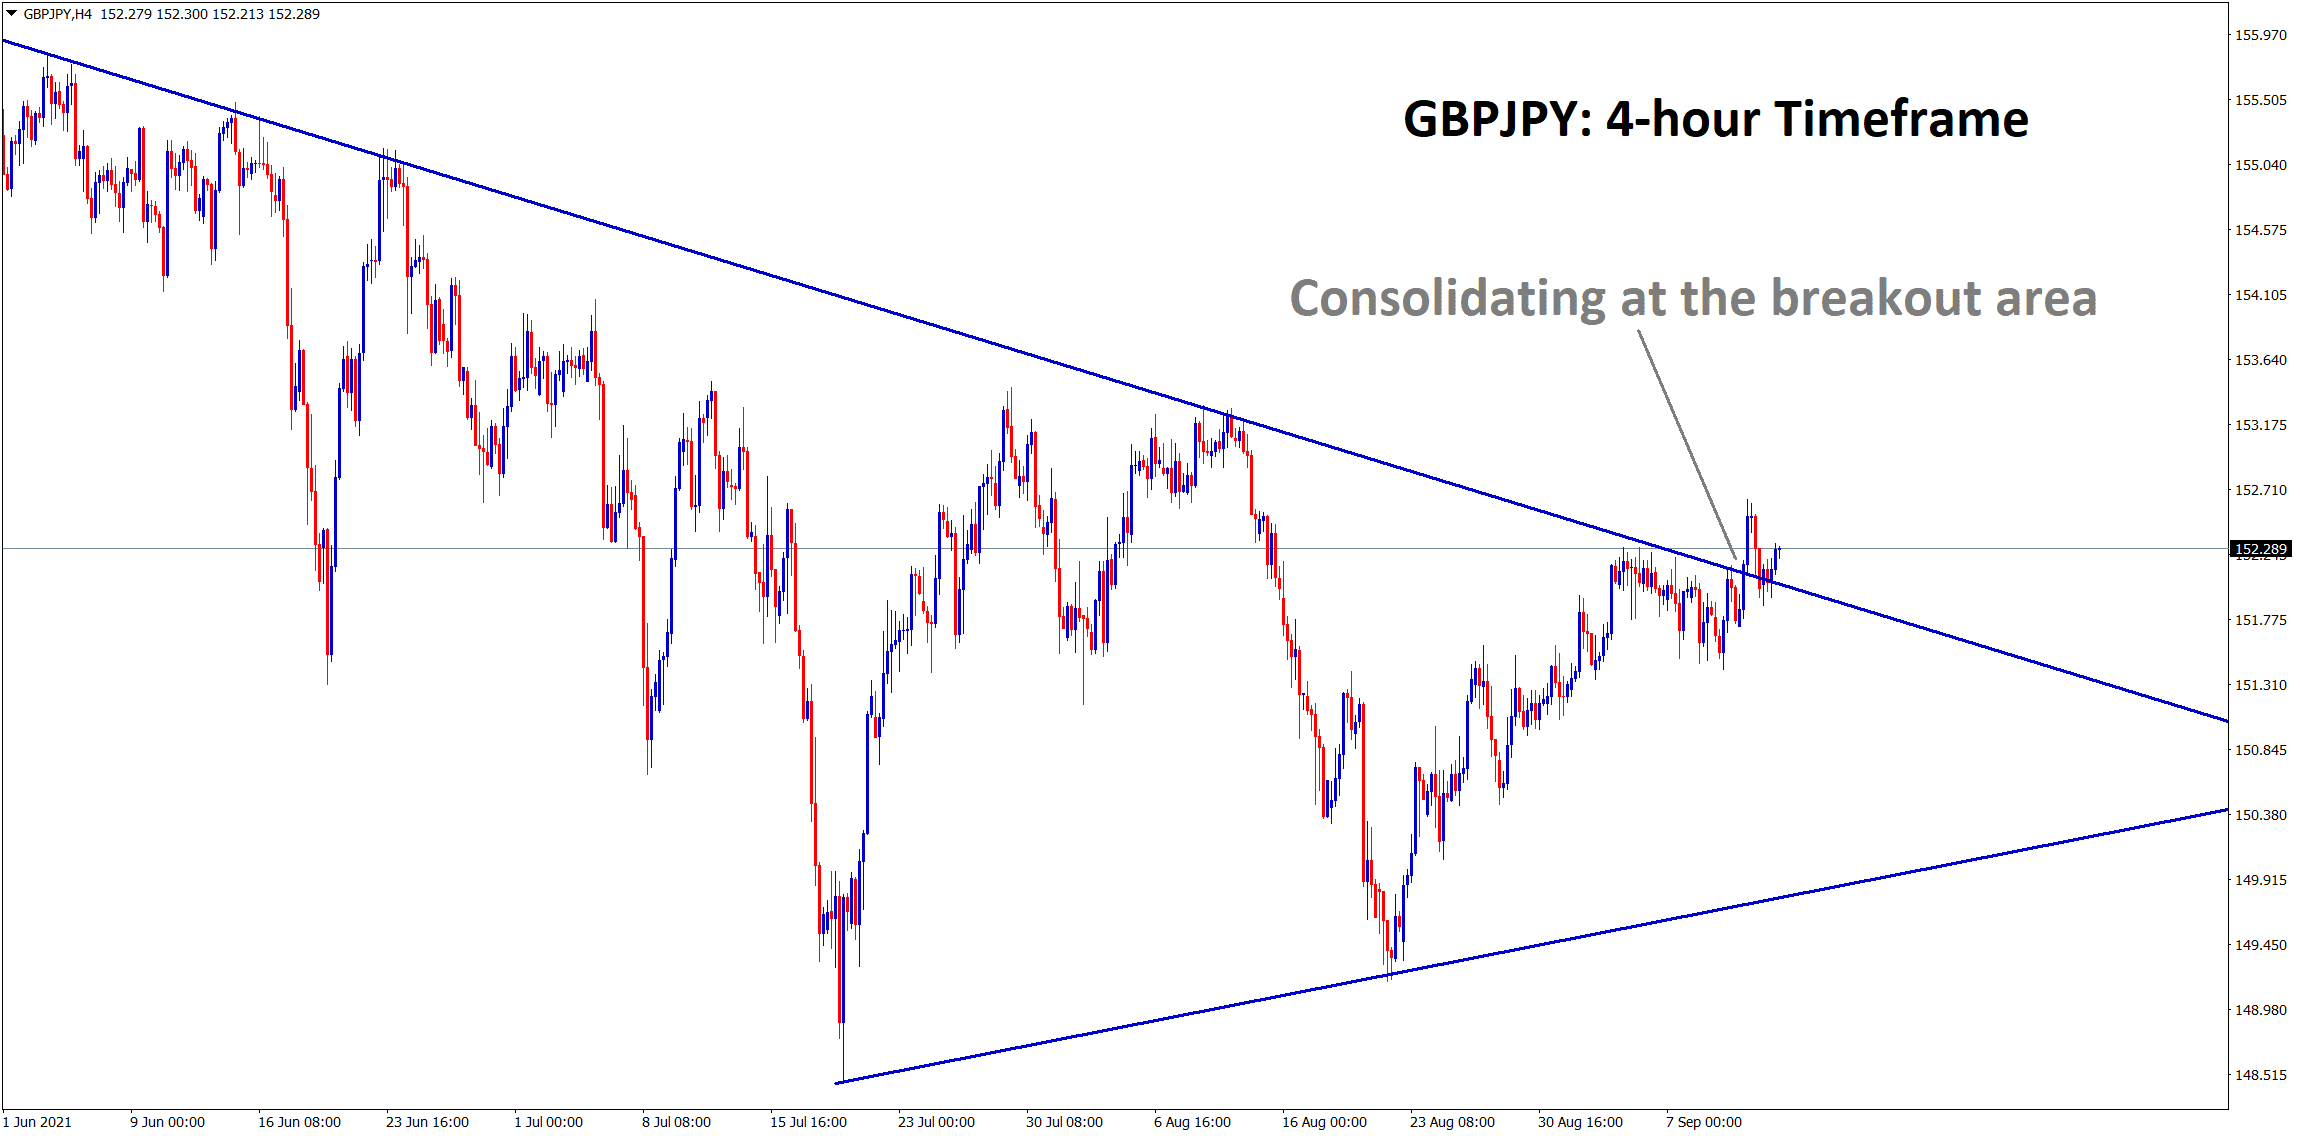 GBPJPY is consolidating now at the breakout area